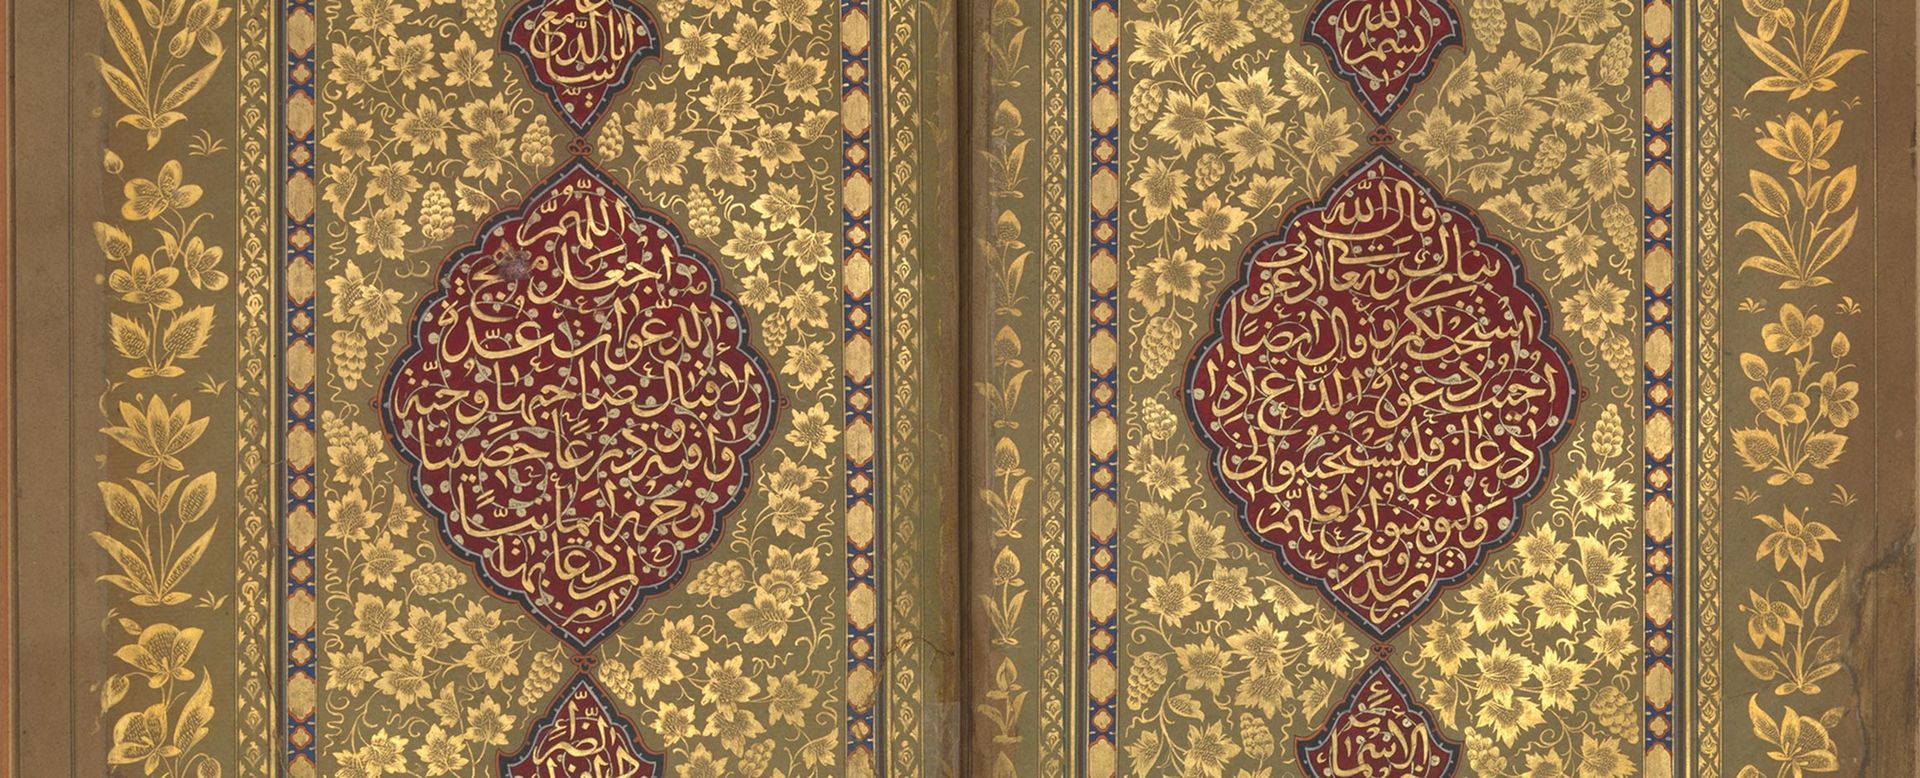 Detail of an Islamic Book of Brayers with gold illustrations of flowers surrounding a crimson design containing Arabic text